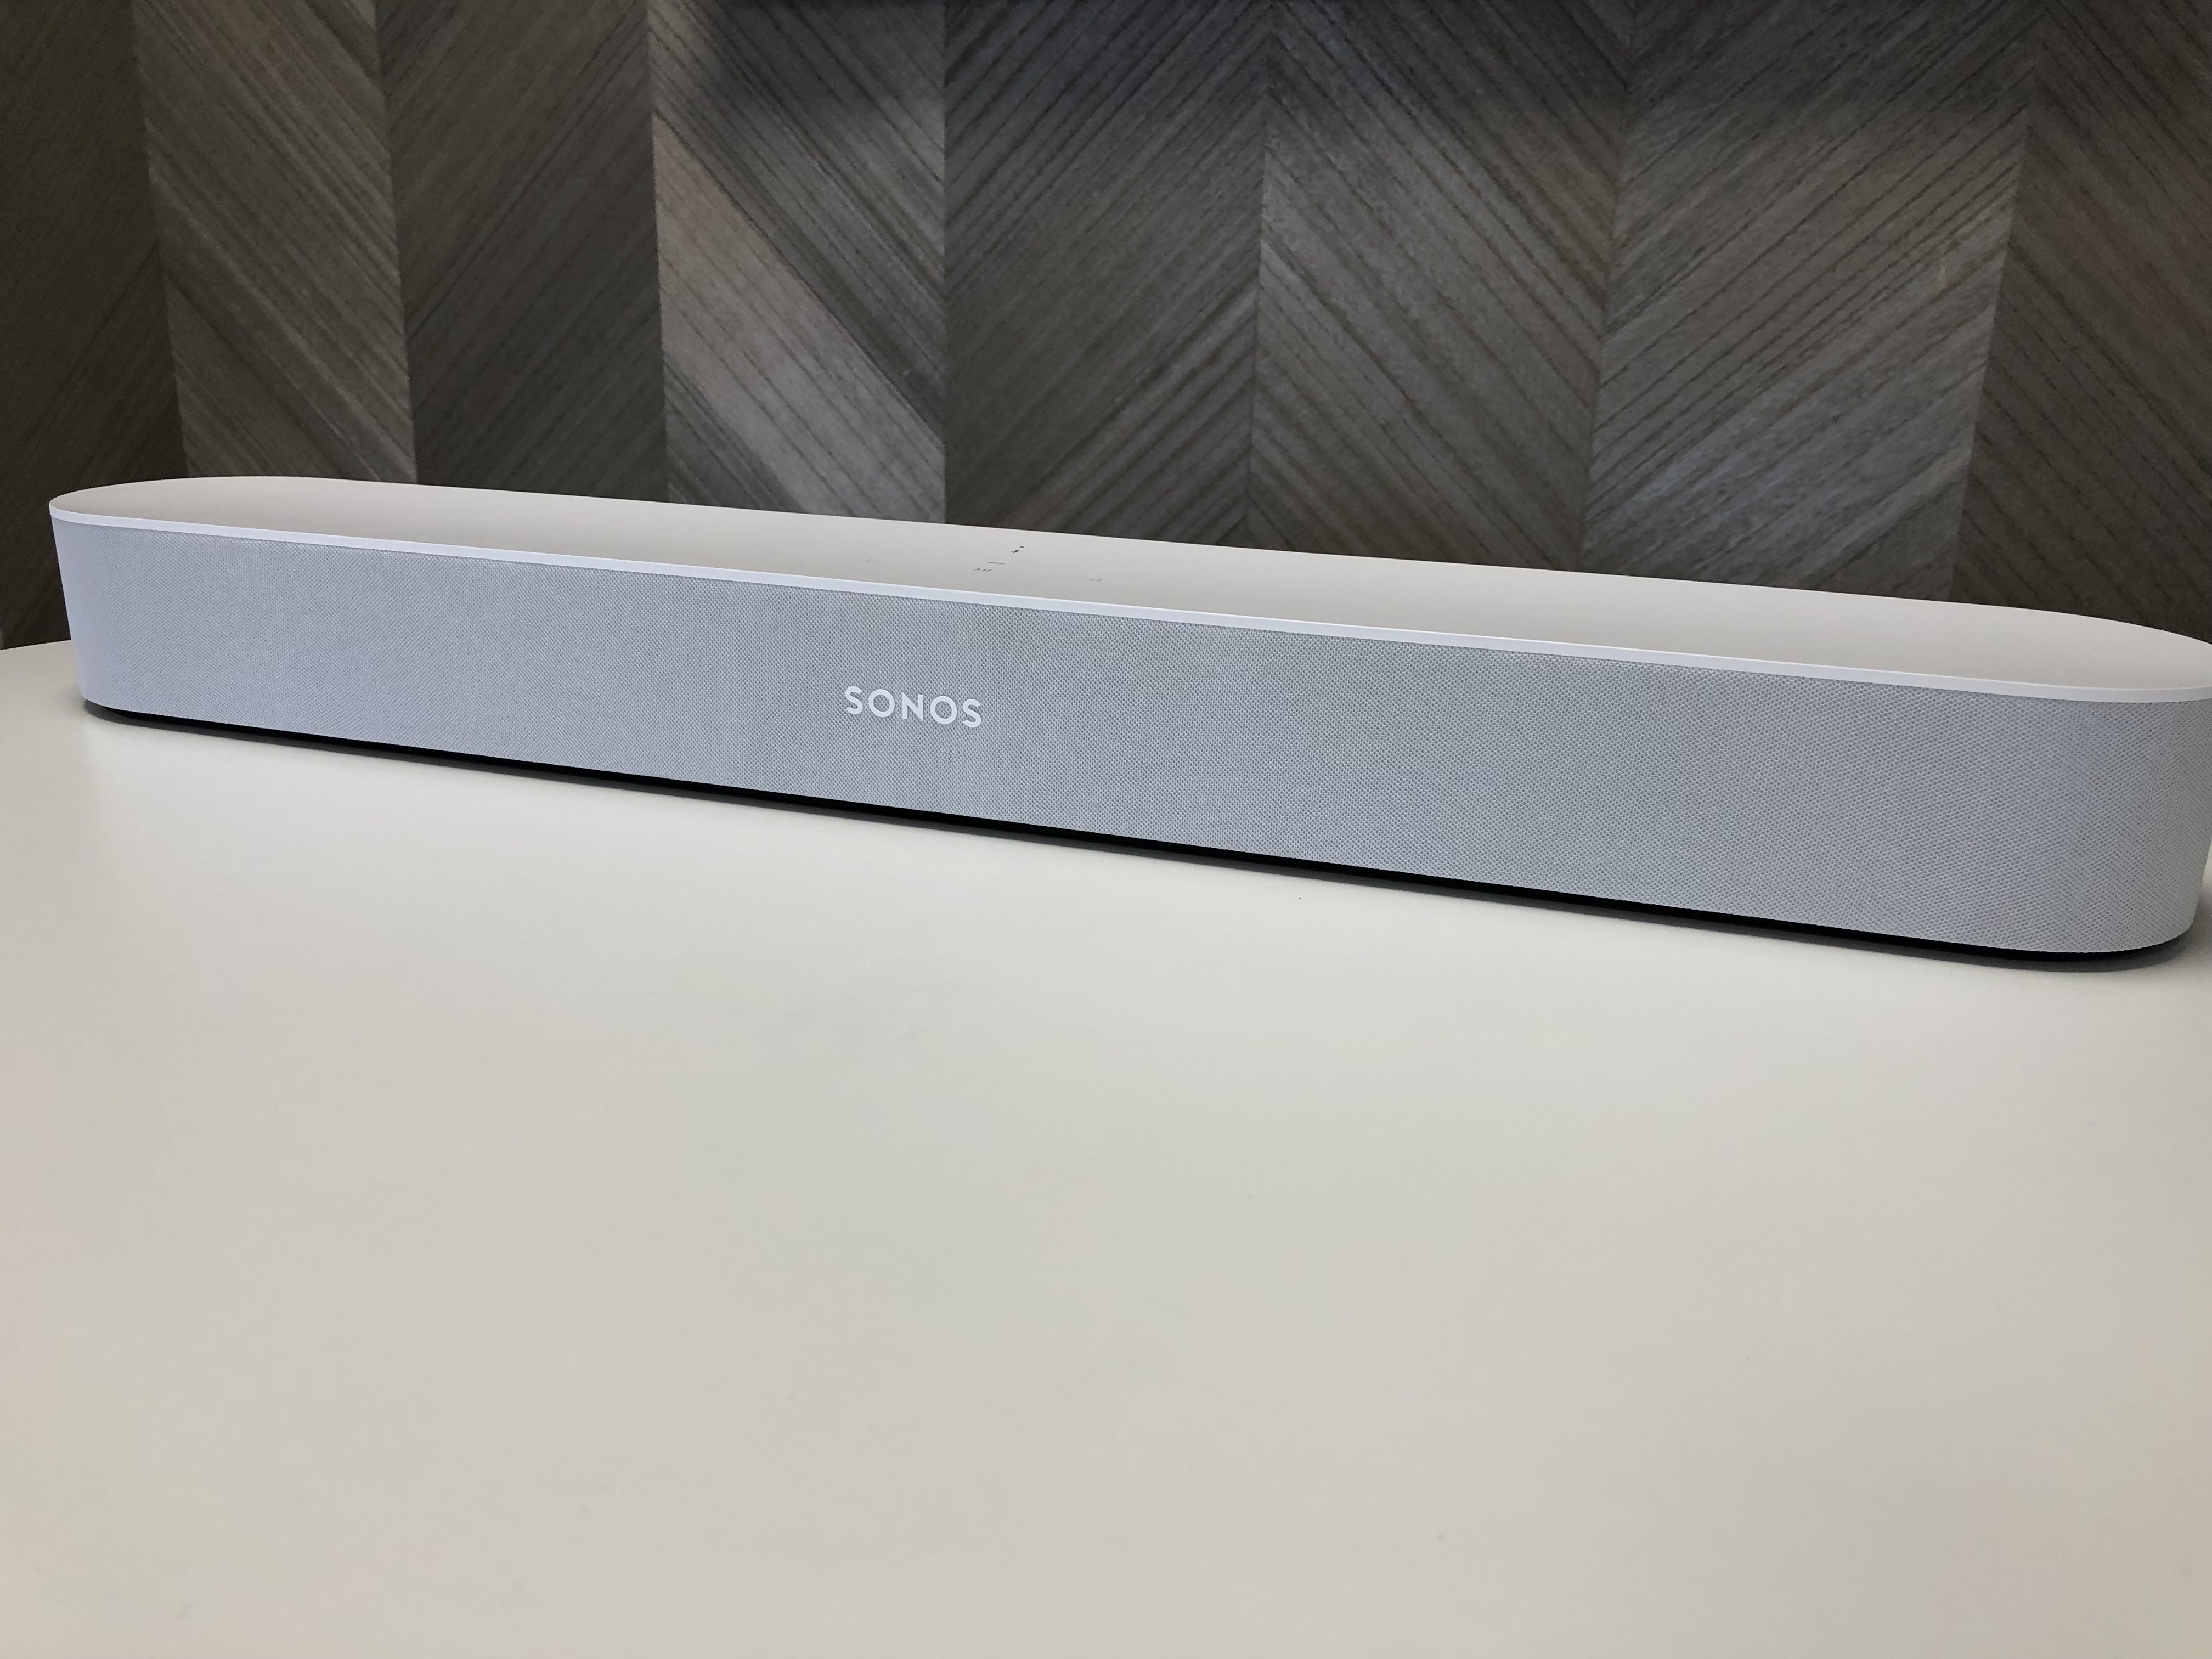 precedent Nog steeds Keer terug 10 Cool Features about the Sonos Beam you'll Love